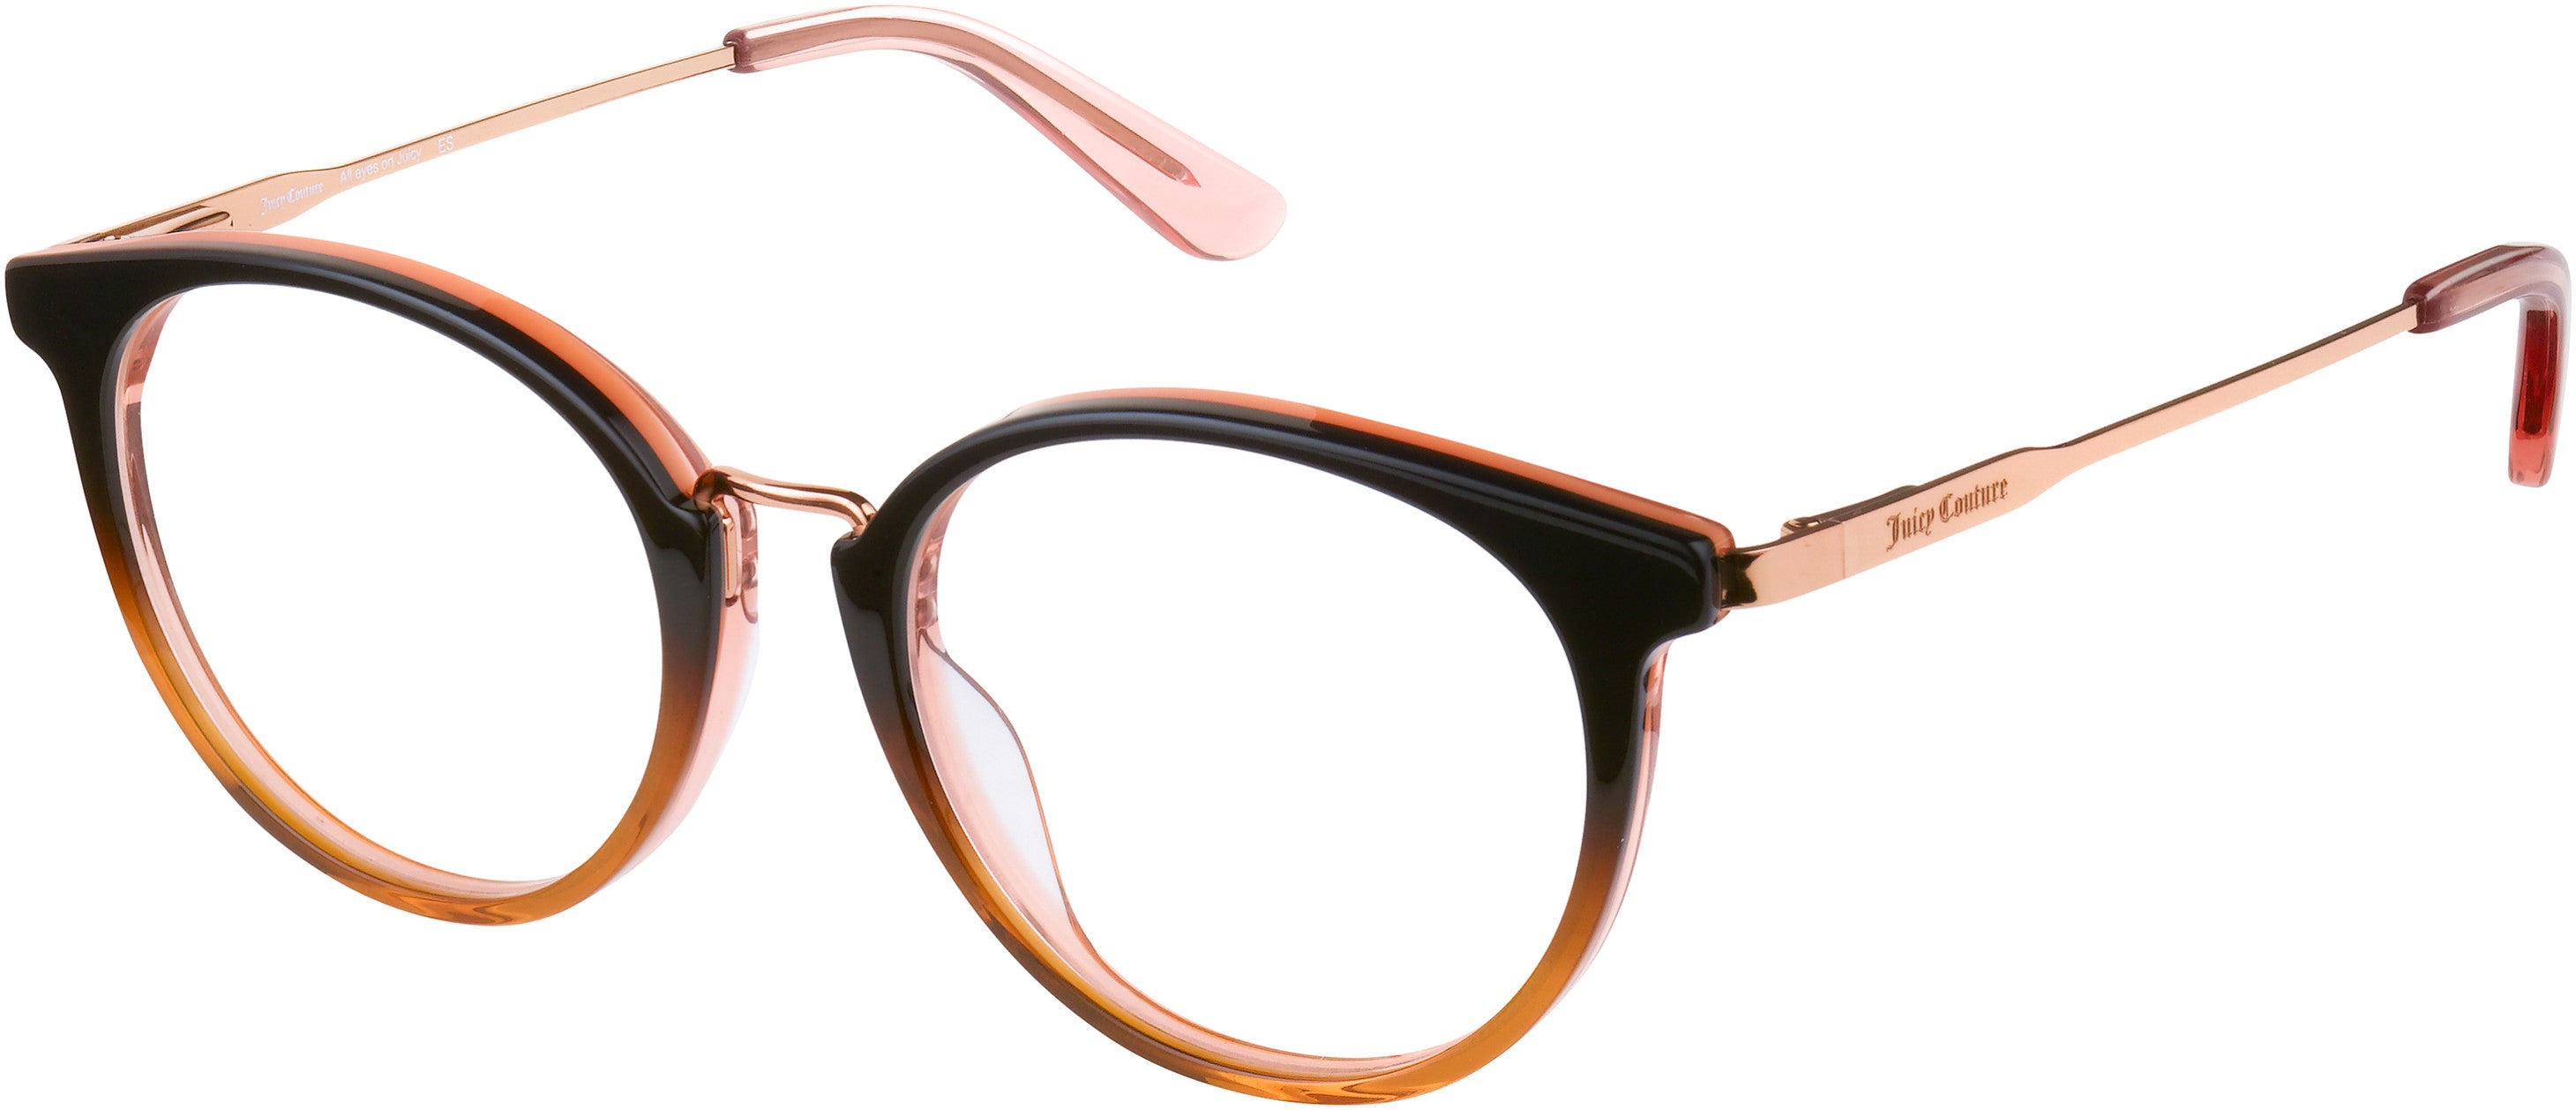 Juicy Couture Juicy 183 Oval Modified Eyeglasses 009Q-009Q  Brown (00 Demo Lens)